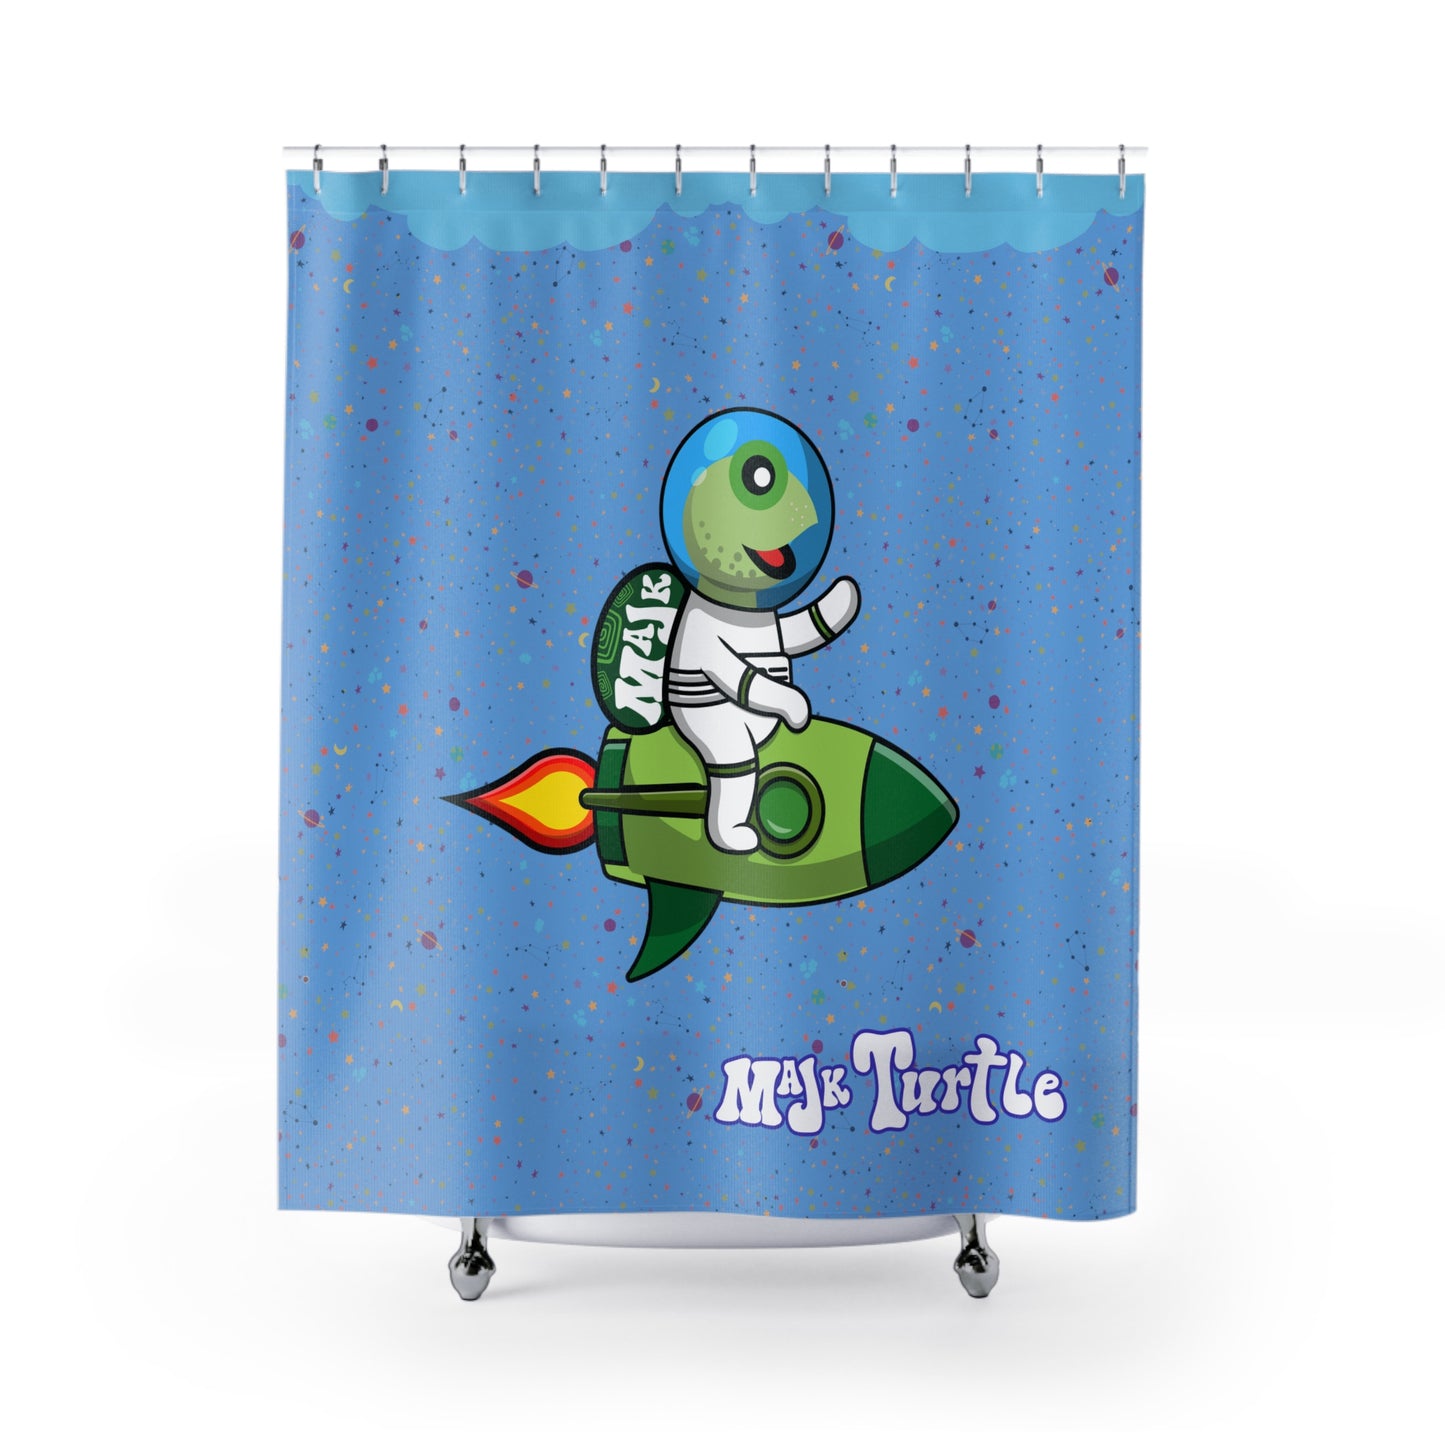 Shower Curtain "Blast off collection"